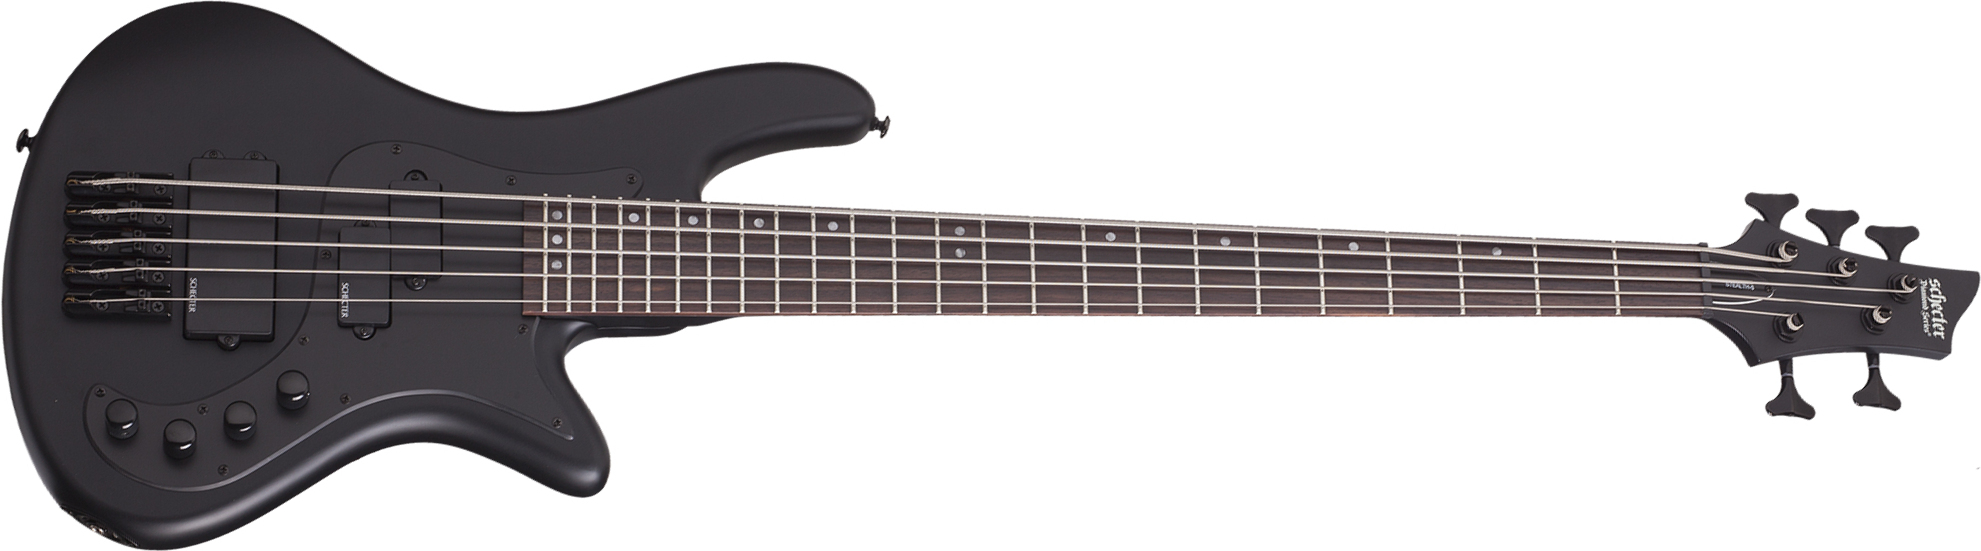 Schecter Stiletto Stealth-5 5c Active Rw - Satin Black - Solid body electric bass - Main picture